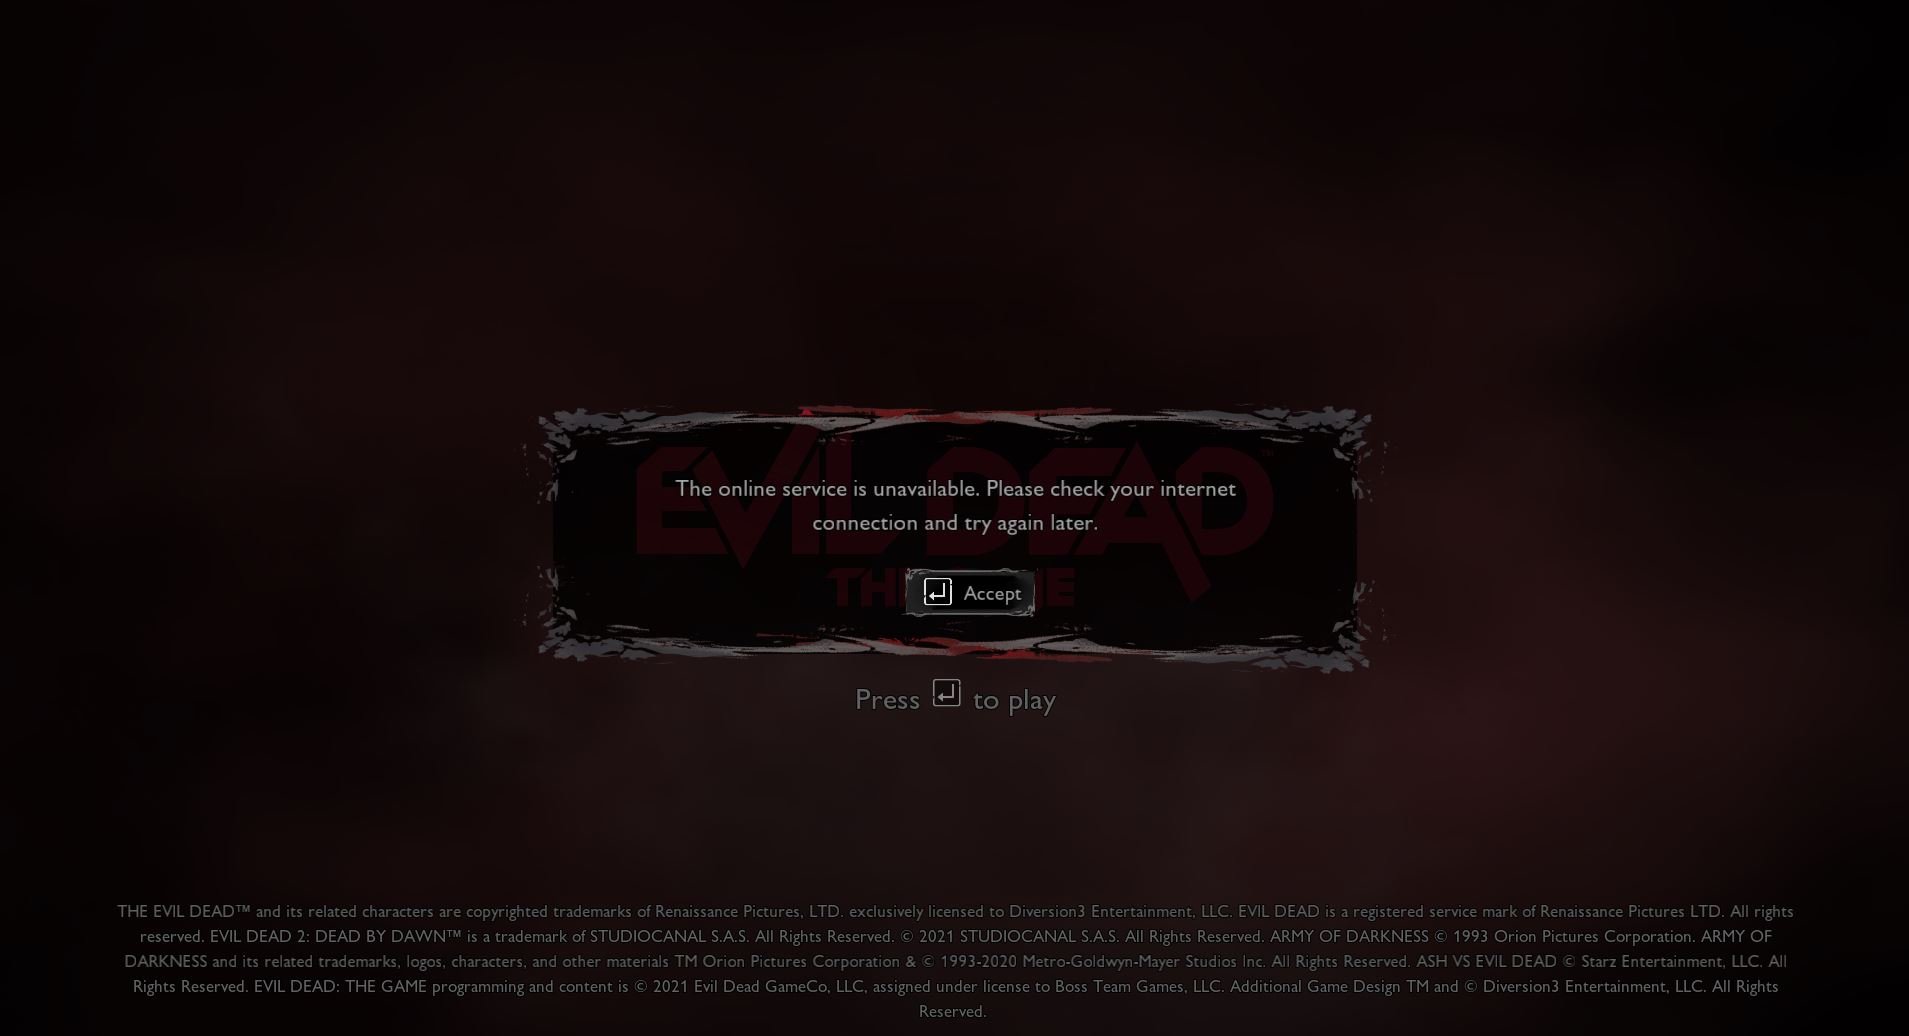 Evil Dead: The Game is delayed again